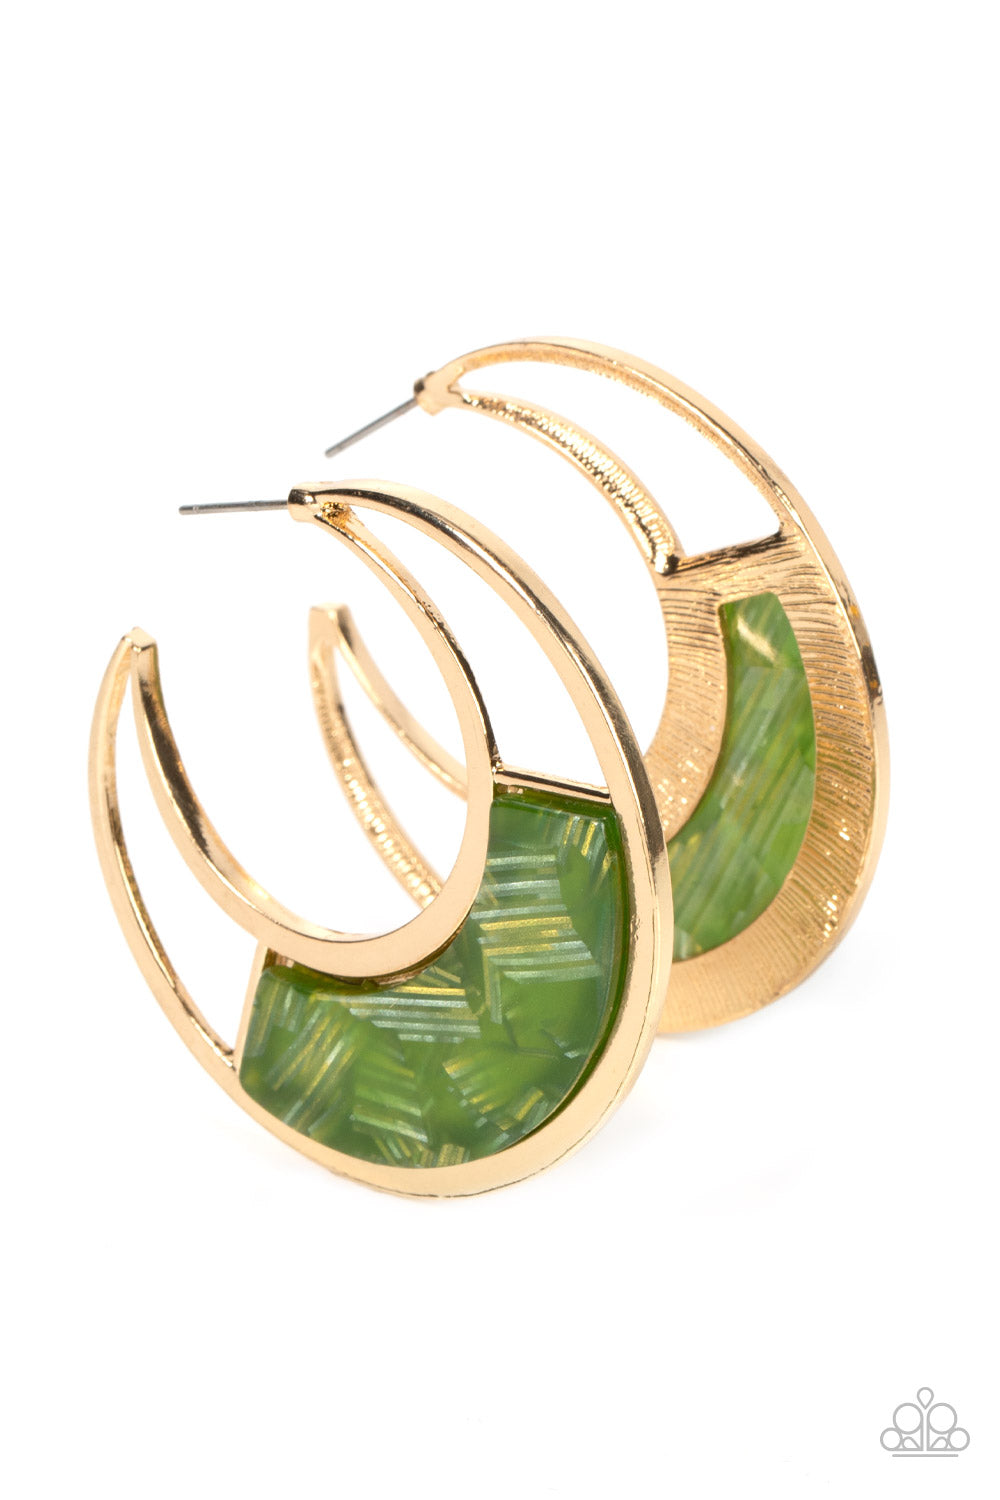 Paparazzi Accessories - Contemporary Curves - Green Hoop Earrings green acrylic plate featuring flashes of silver and gold accents adorns the center of a gold half moon frame, coalescing into a trendy hoop. Earring attaches to a standard post fitting. Hoop measures approximately 2" in diameter.  Sold as one pair of hoop earrings.